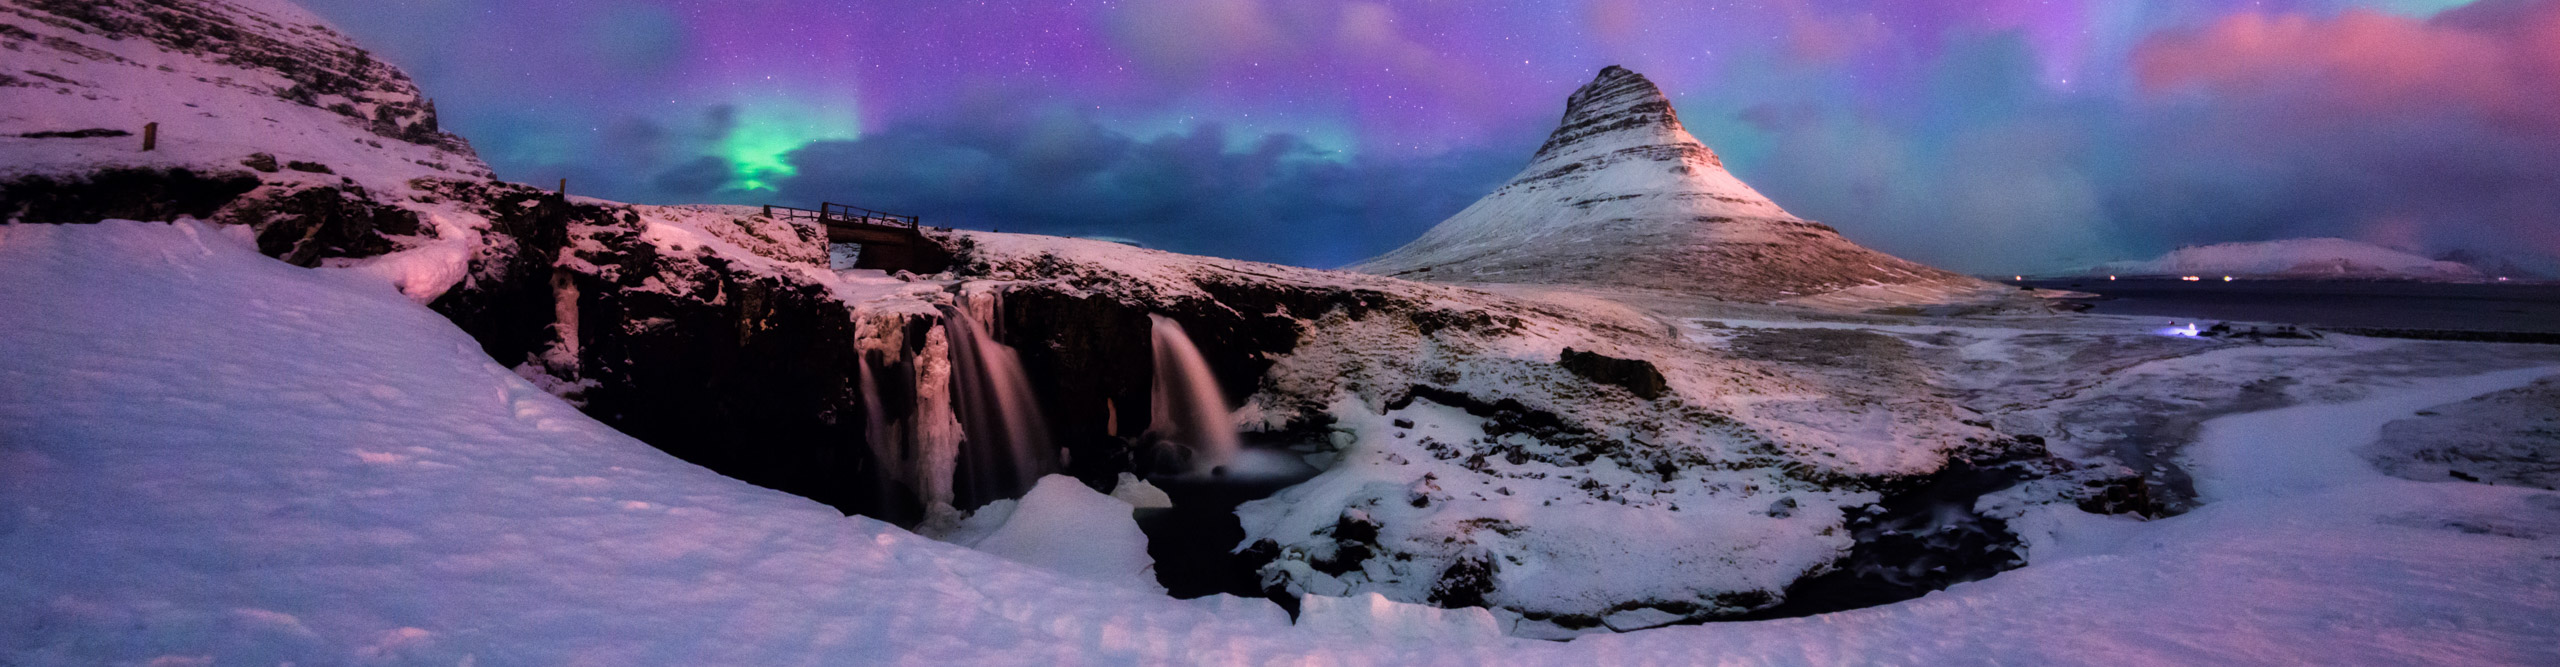 Pink green and blue Northern Lights over the snow-covered  Kirkjufell Mountain,  Iceland.